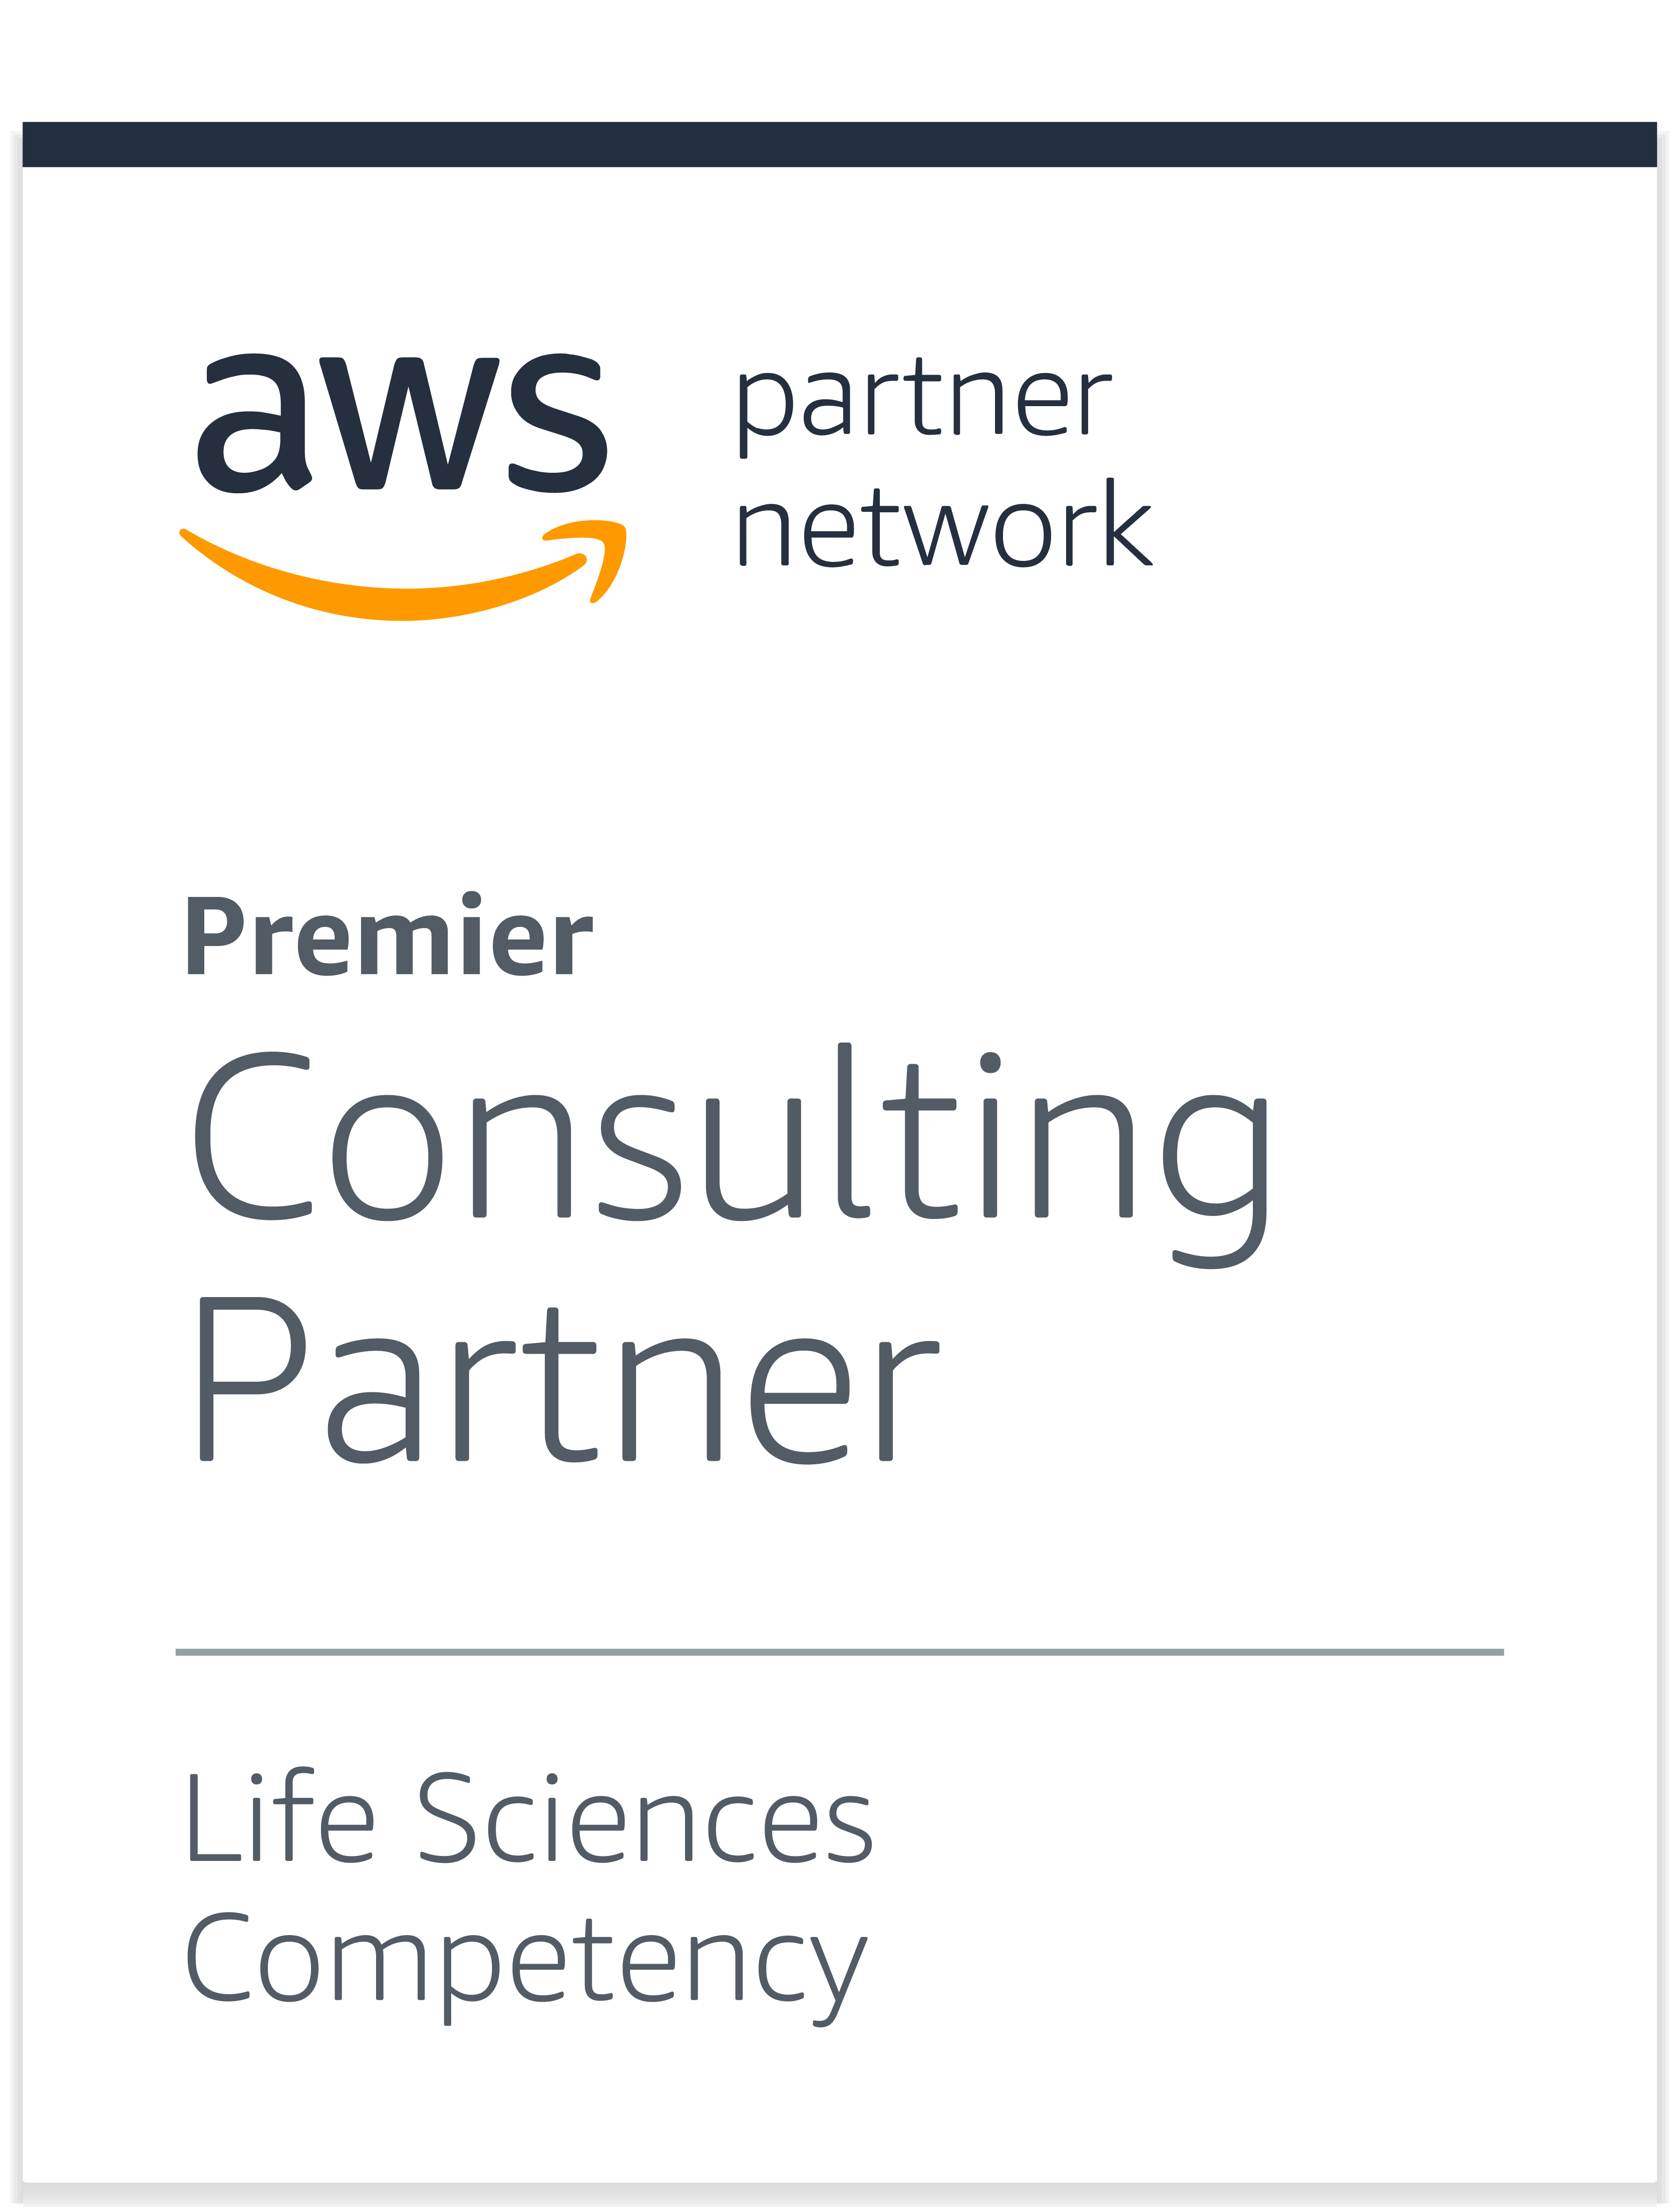 AWS LIfe Sciences Competency